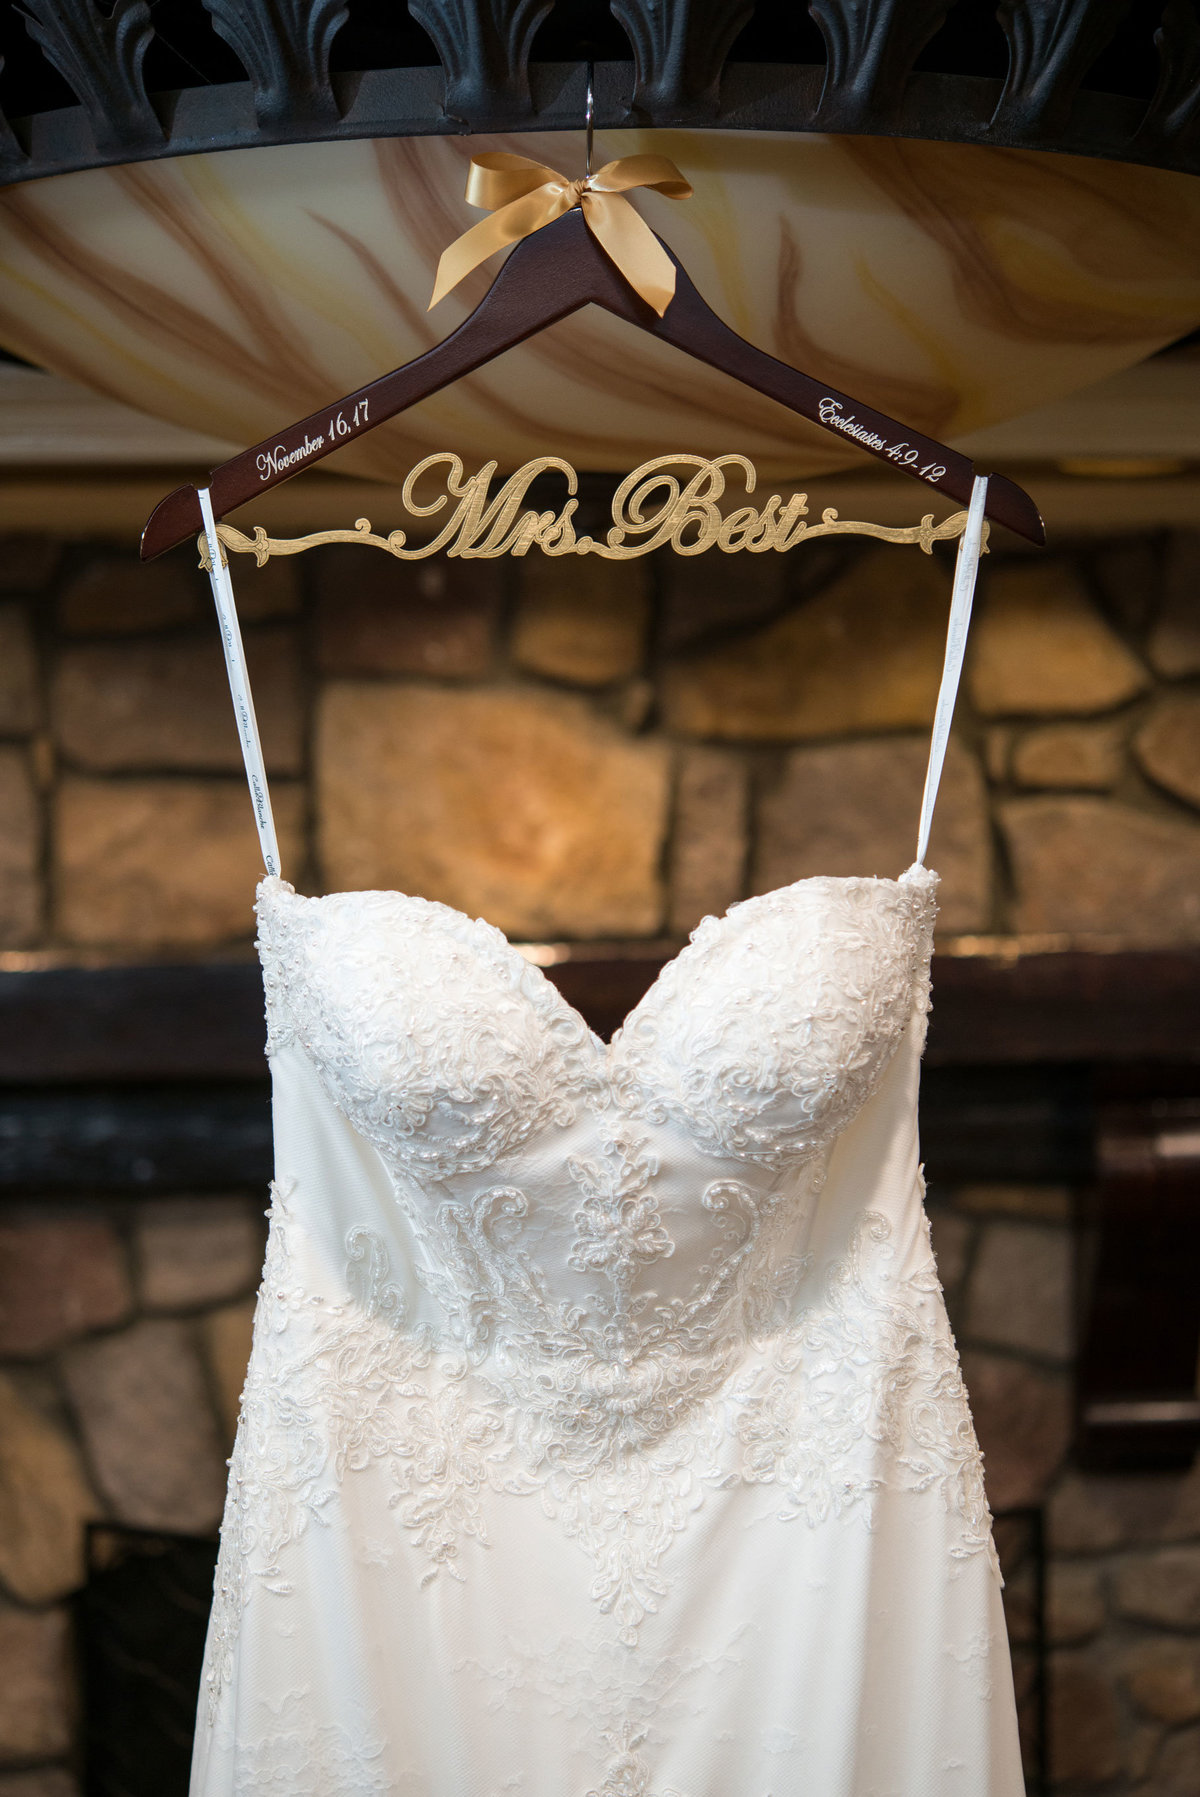 Bride's dress hung up with custom hanger at The Inn at Fox Hollow